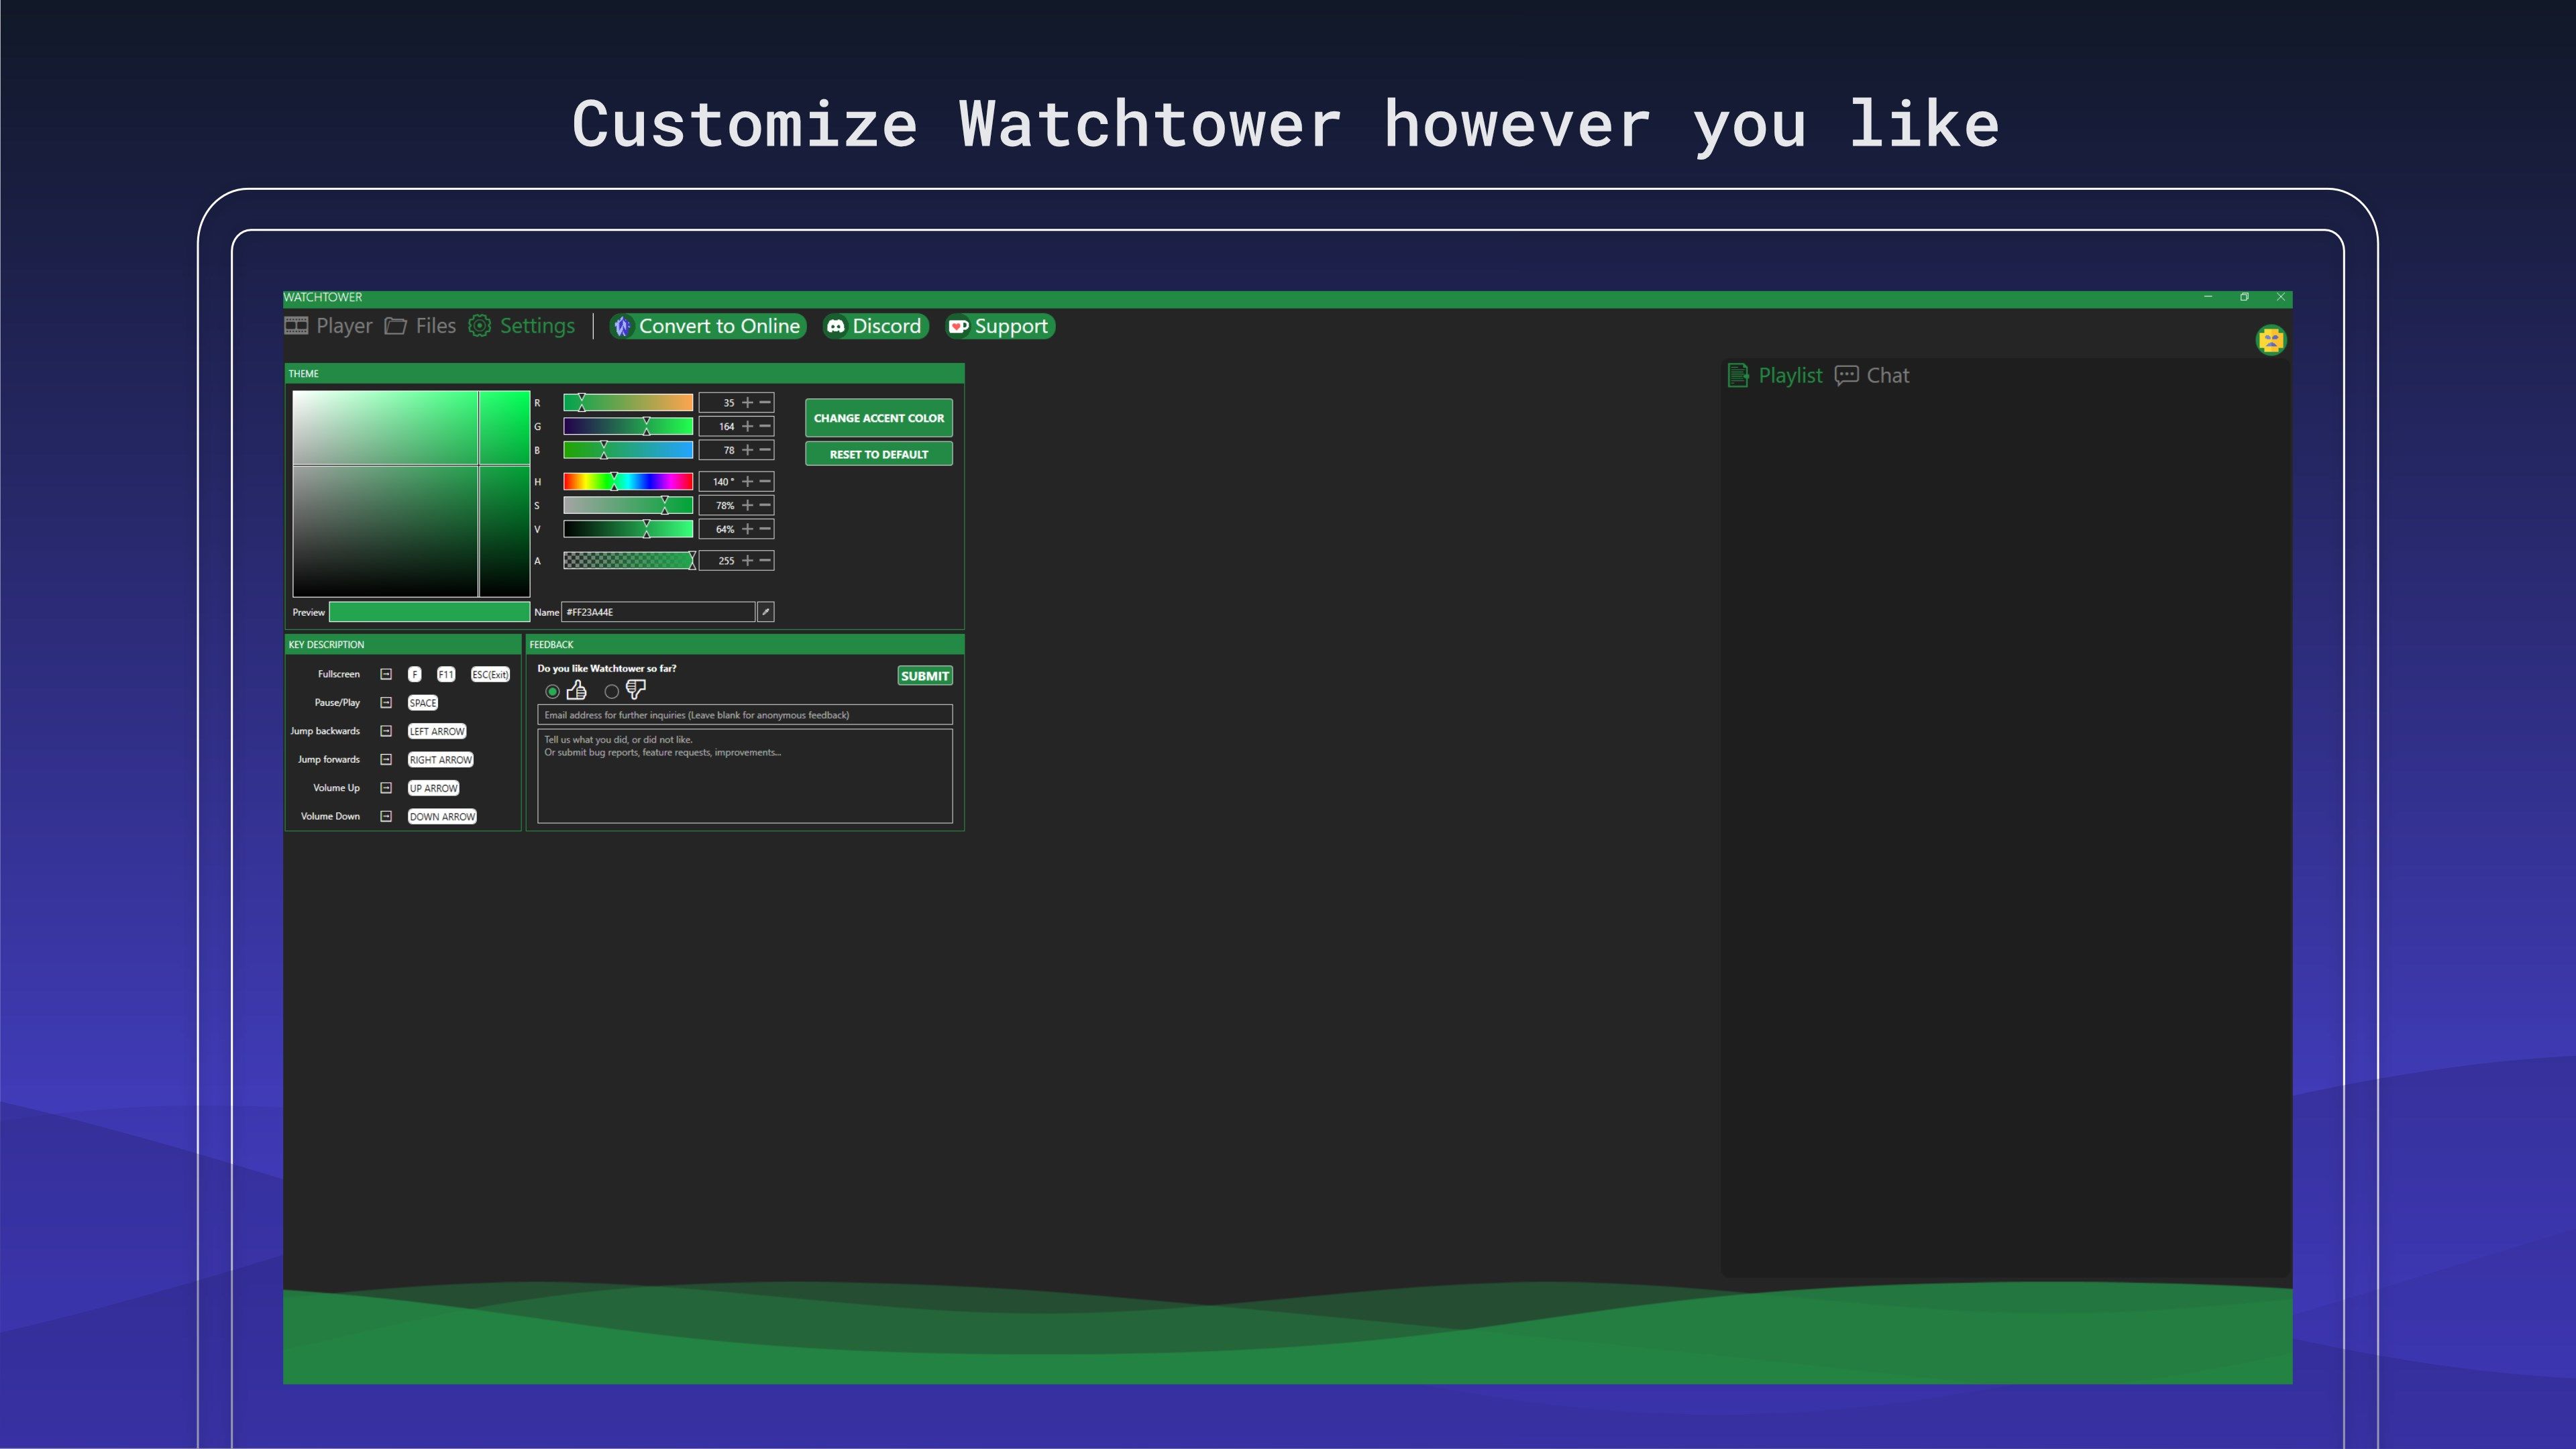 Customize Watchtower however you like